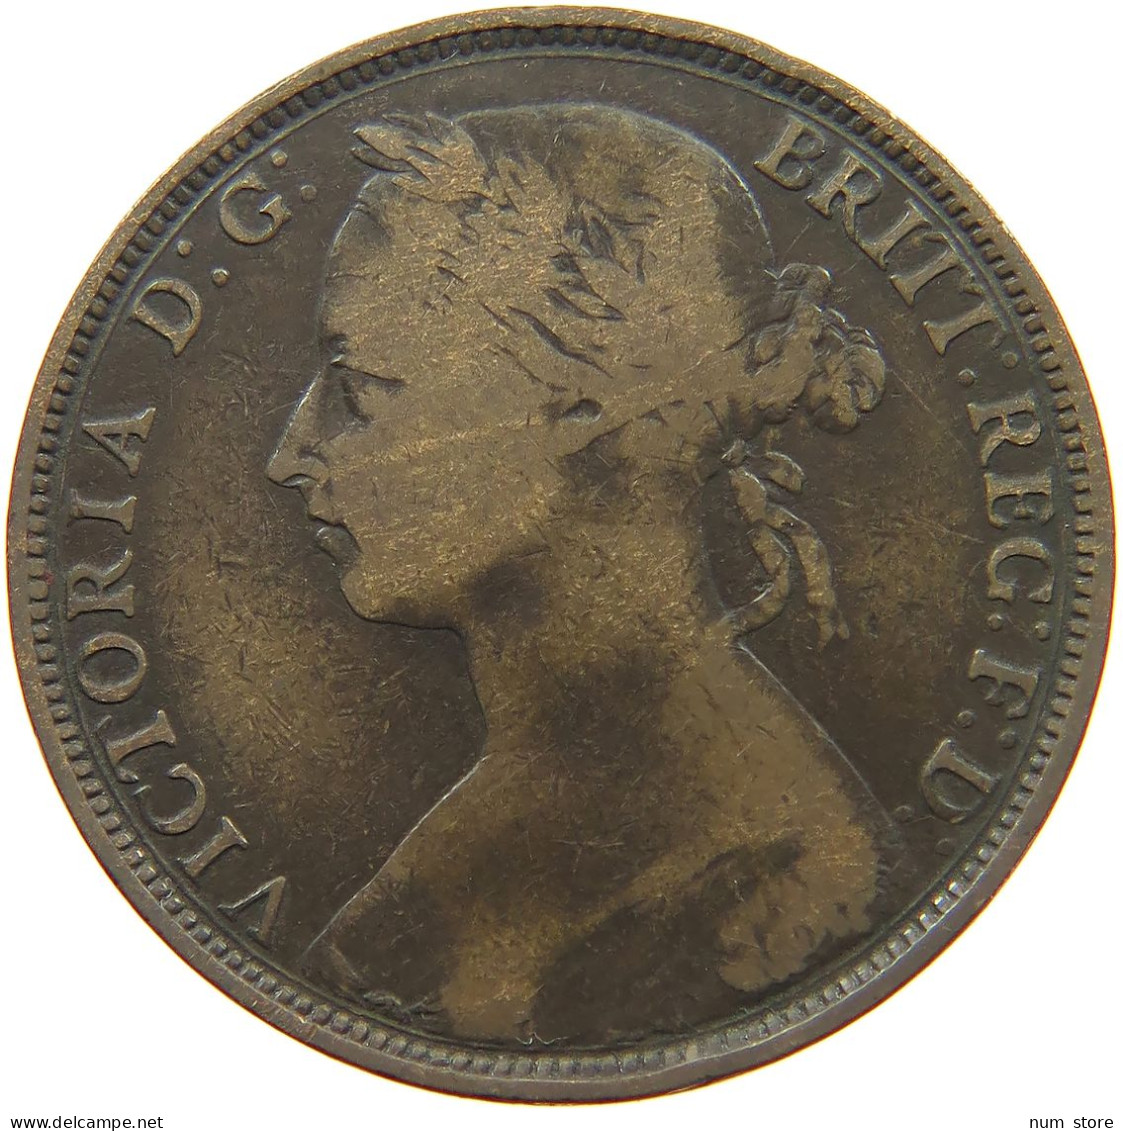 GREAT BRITAIN PENNY 1885 Victoria 1837-1901 #a065 0509 - D. 1 Penny